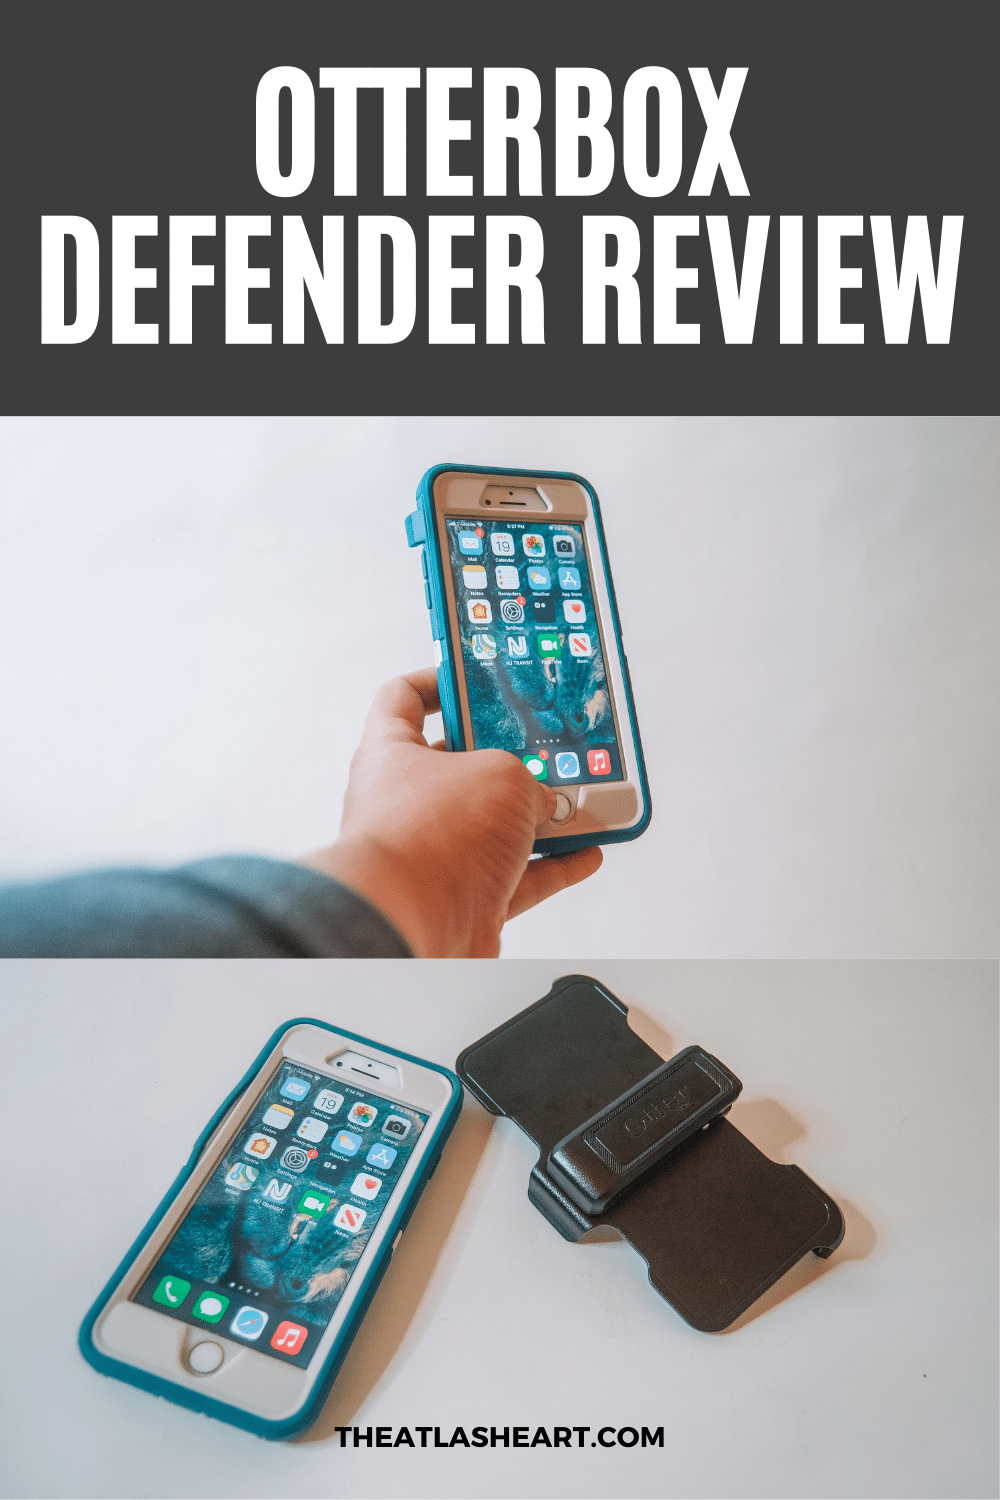 Otterbox Defender Review for 2023: An Honest Look at the Defender Case